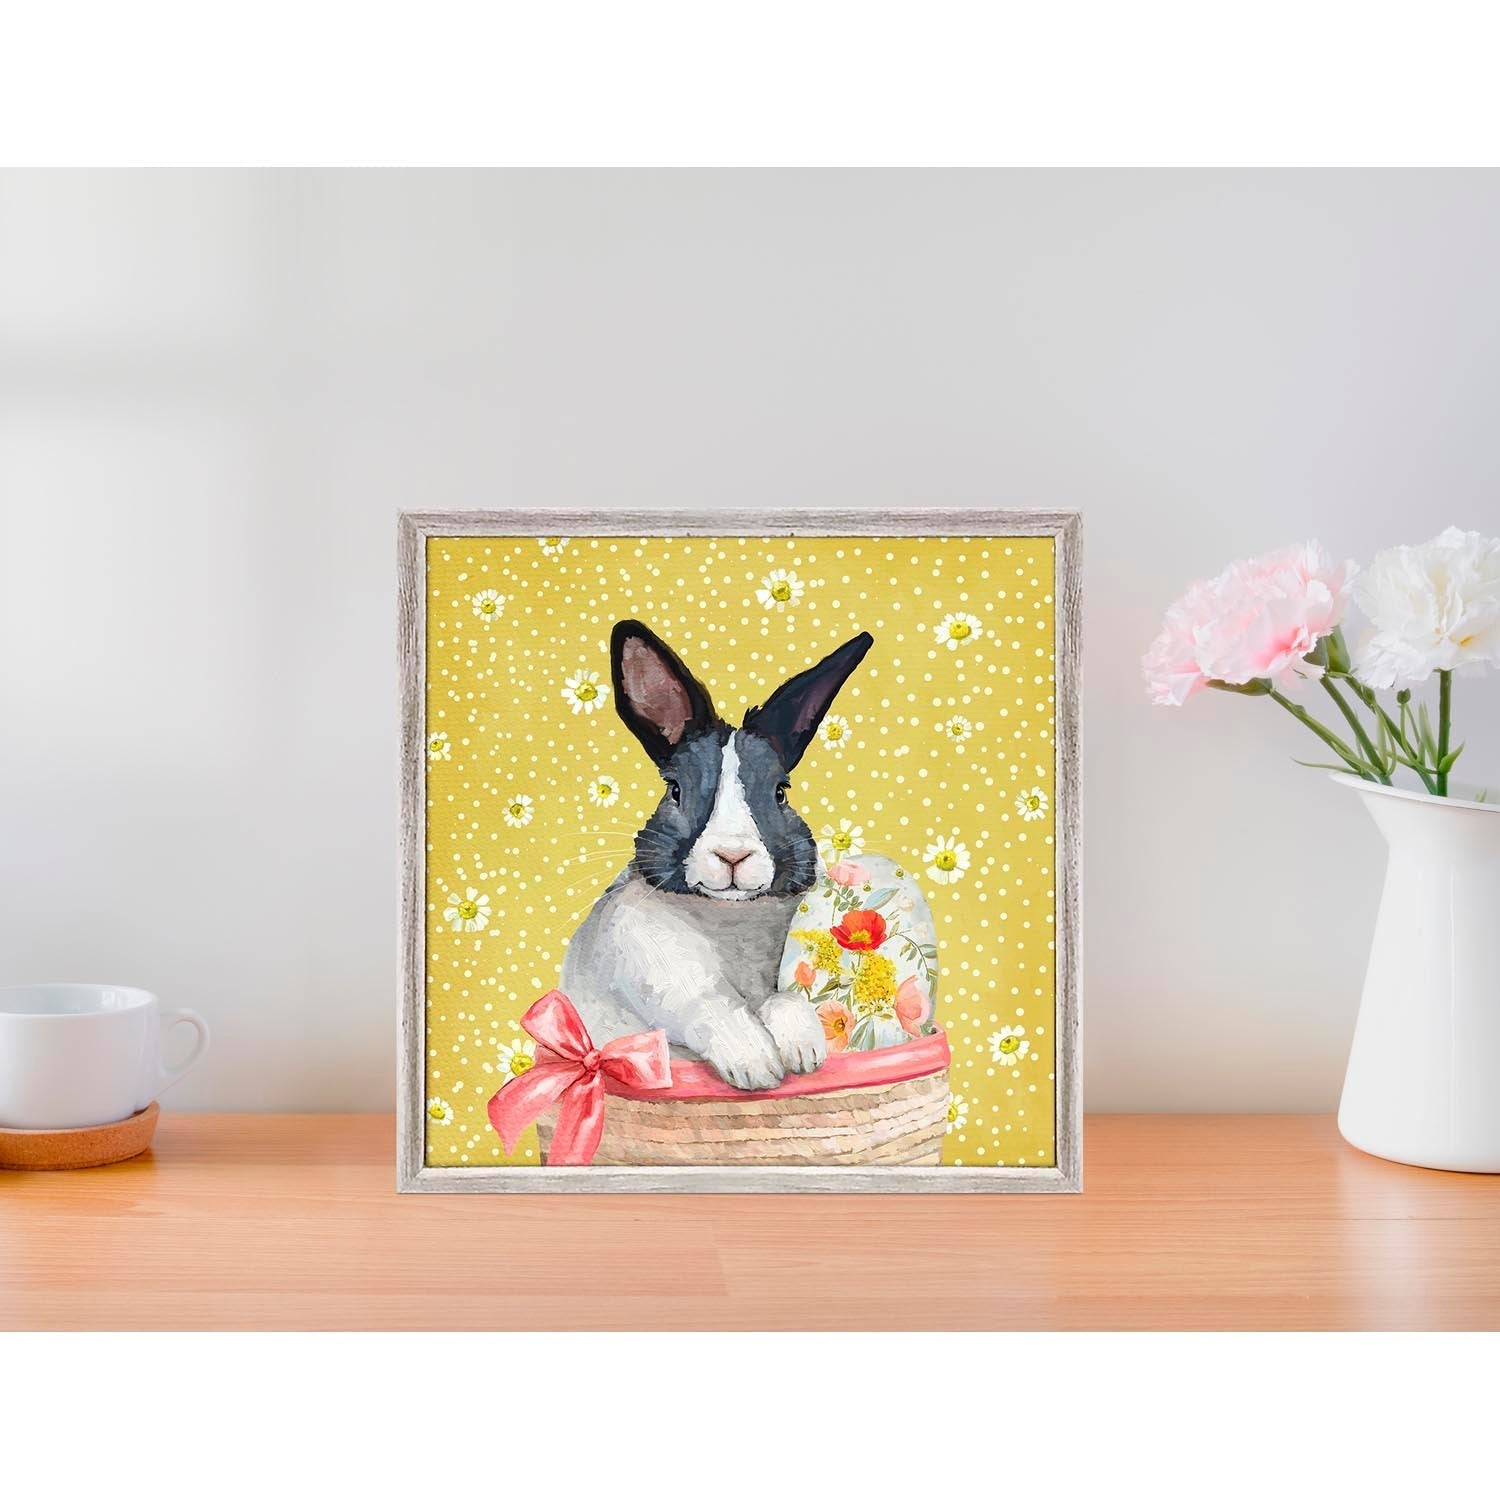 Black And White Bun Mini Framed Canvas-Mini Framed Canvas-Jack and Jill Boutique